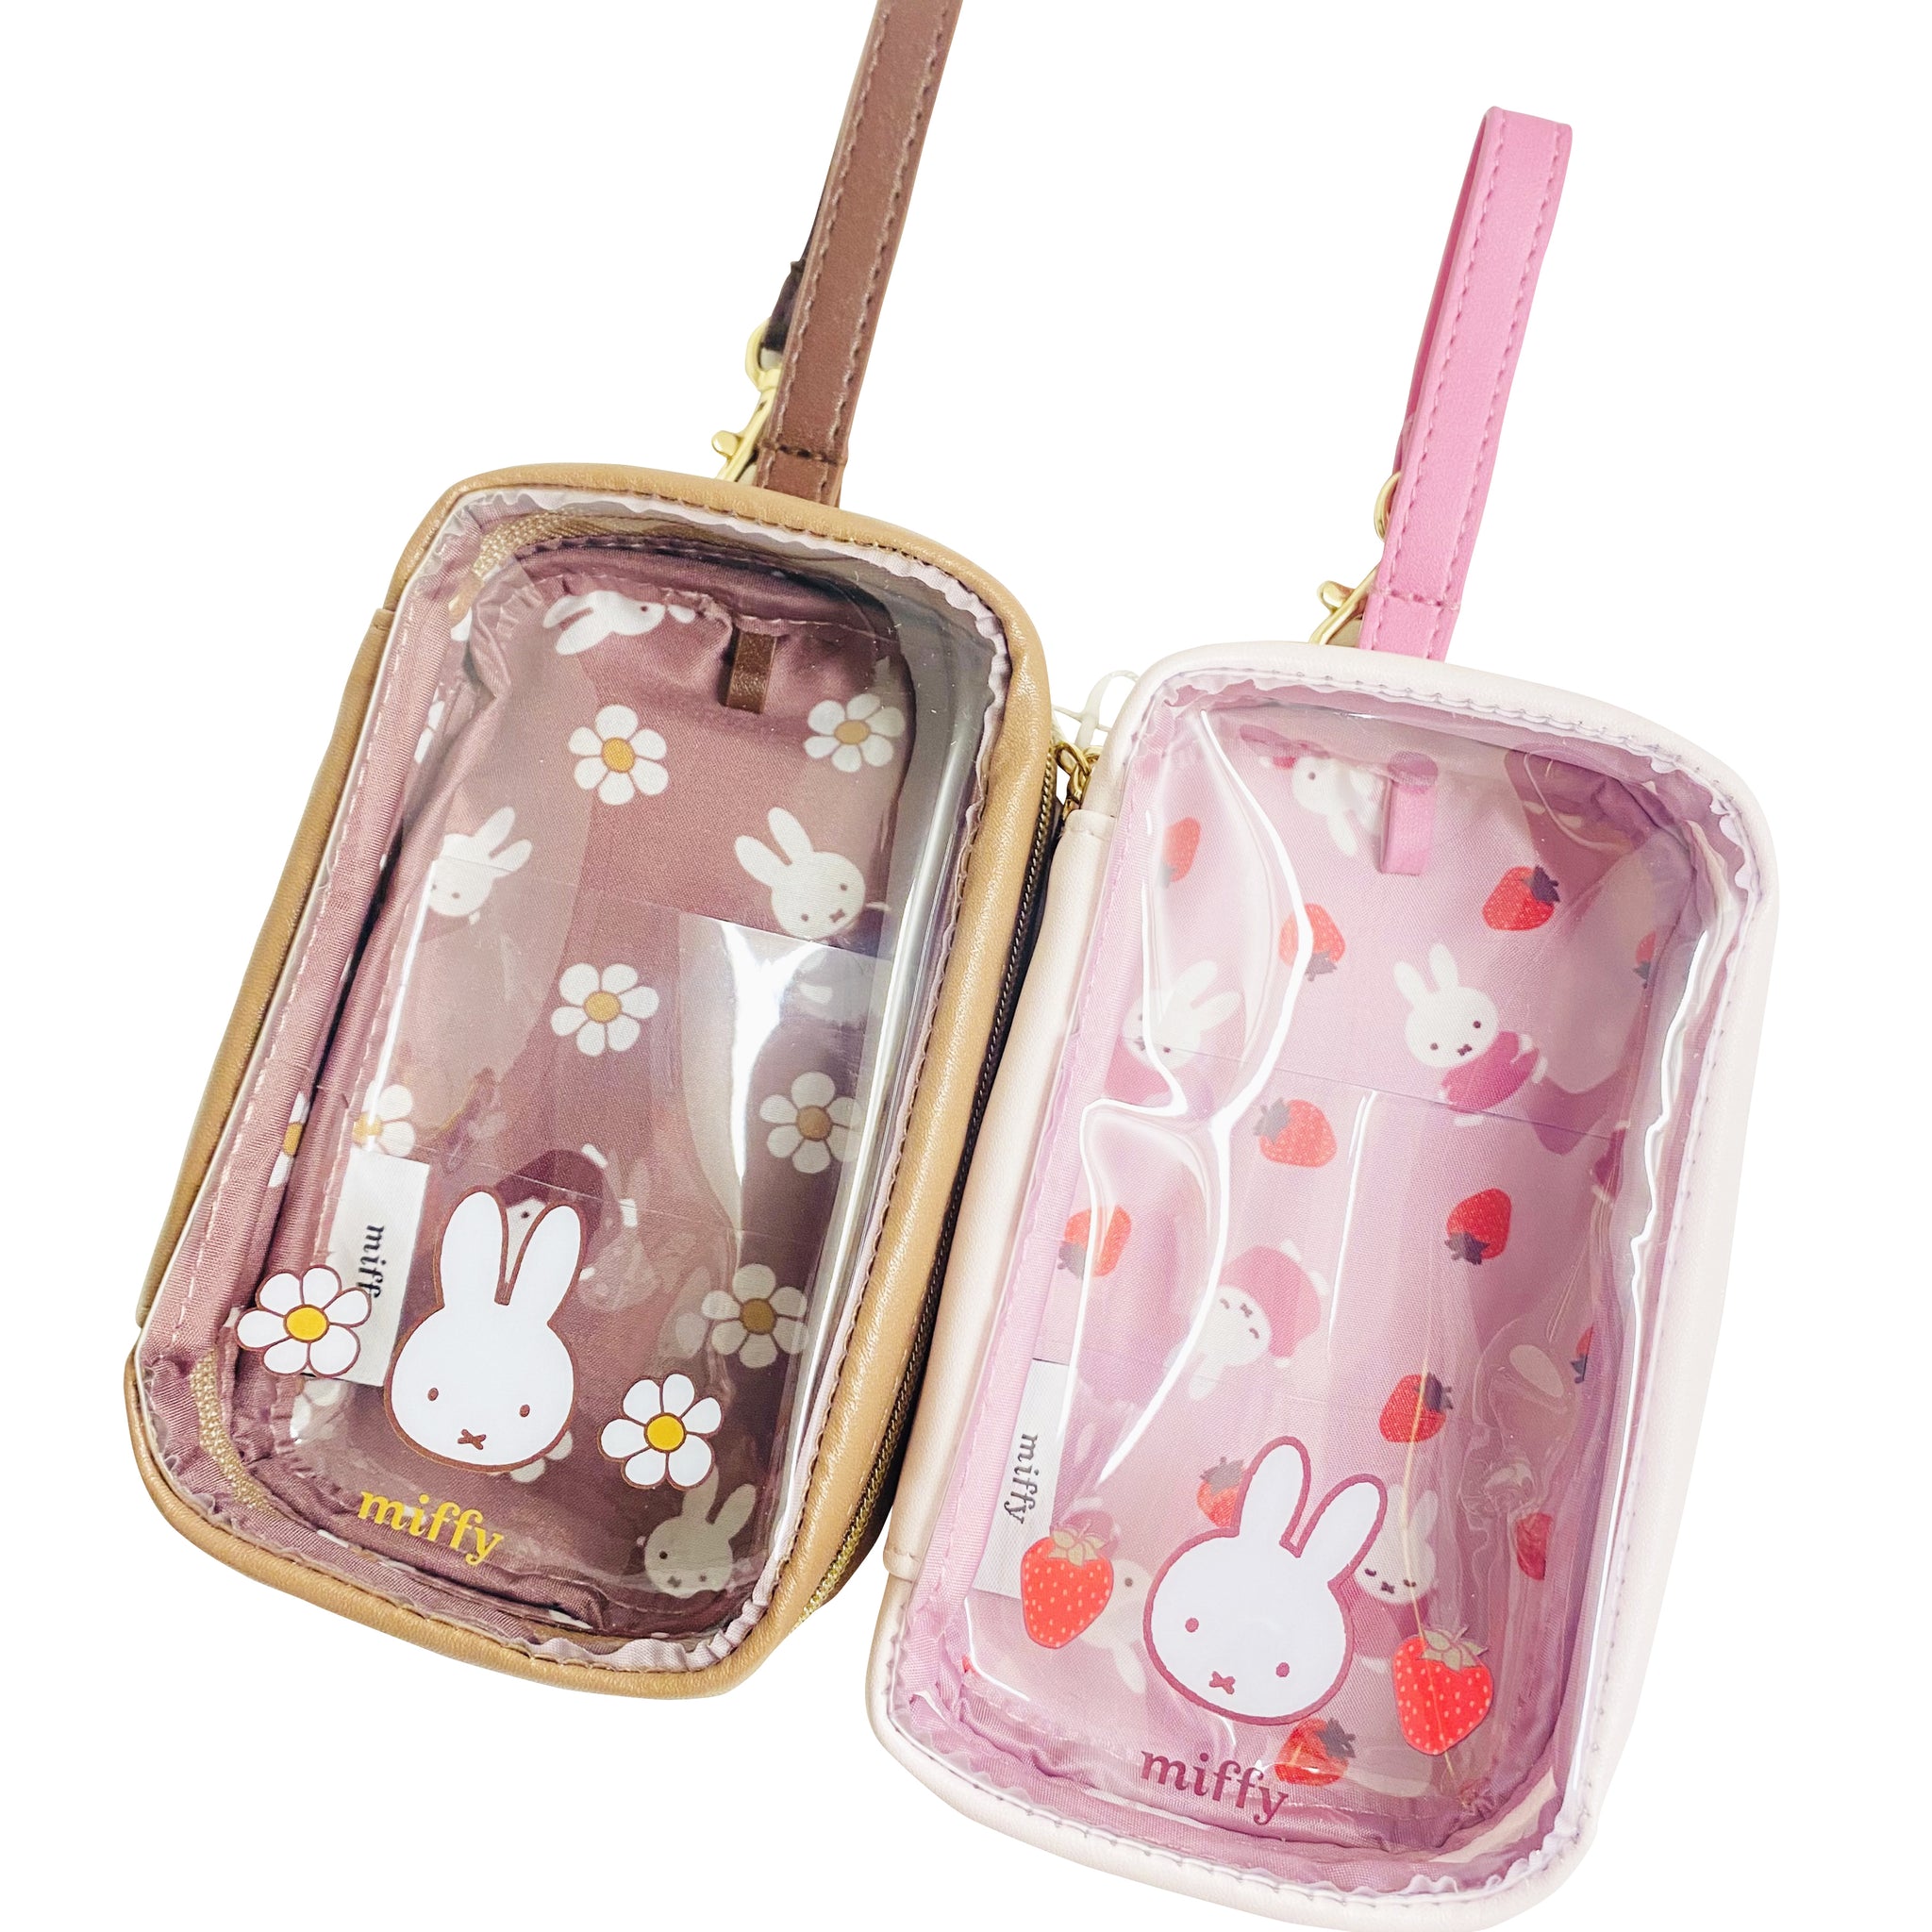 Miffy Rectangle Pouch - Chocolate/Strawberry (C-2)